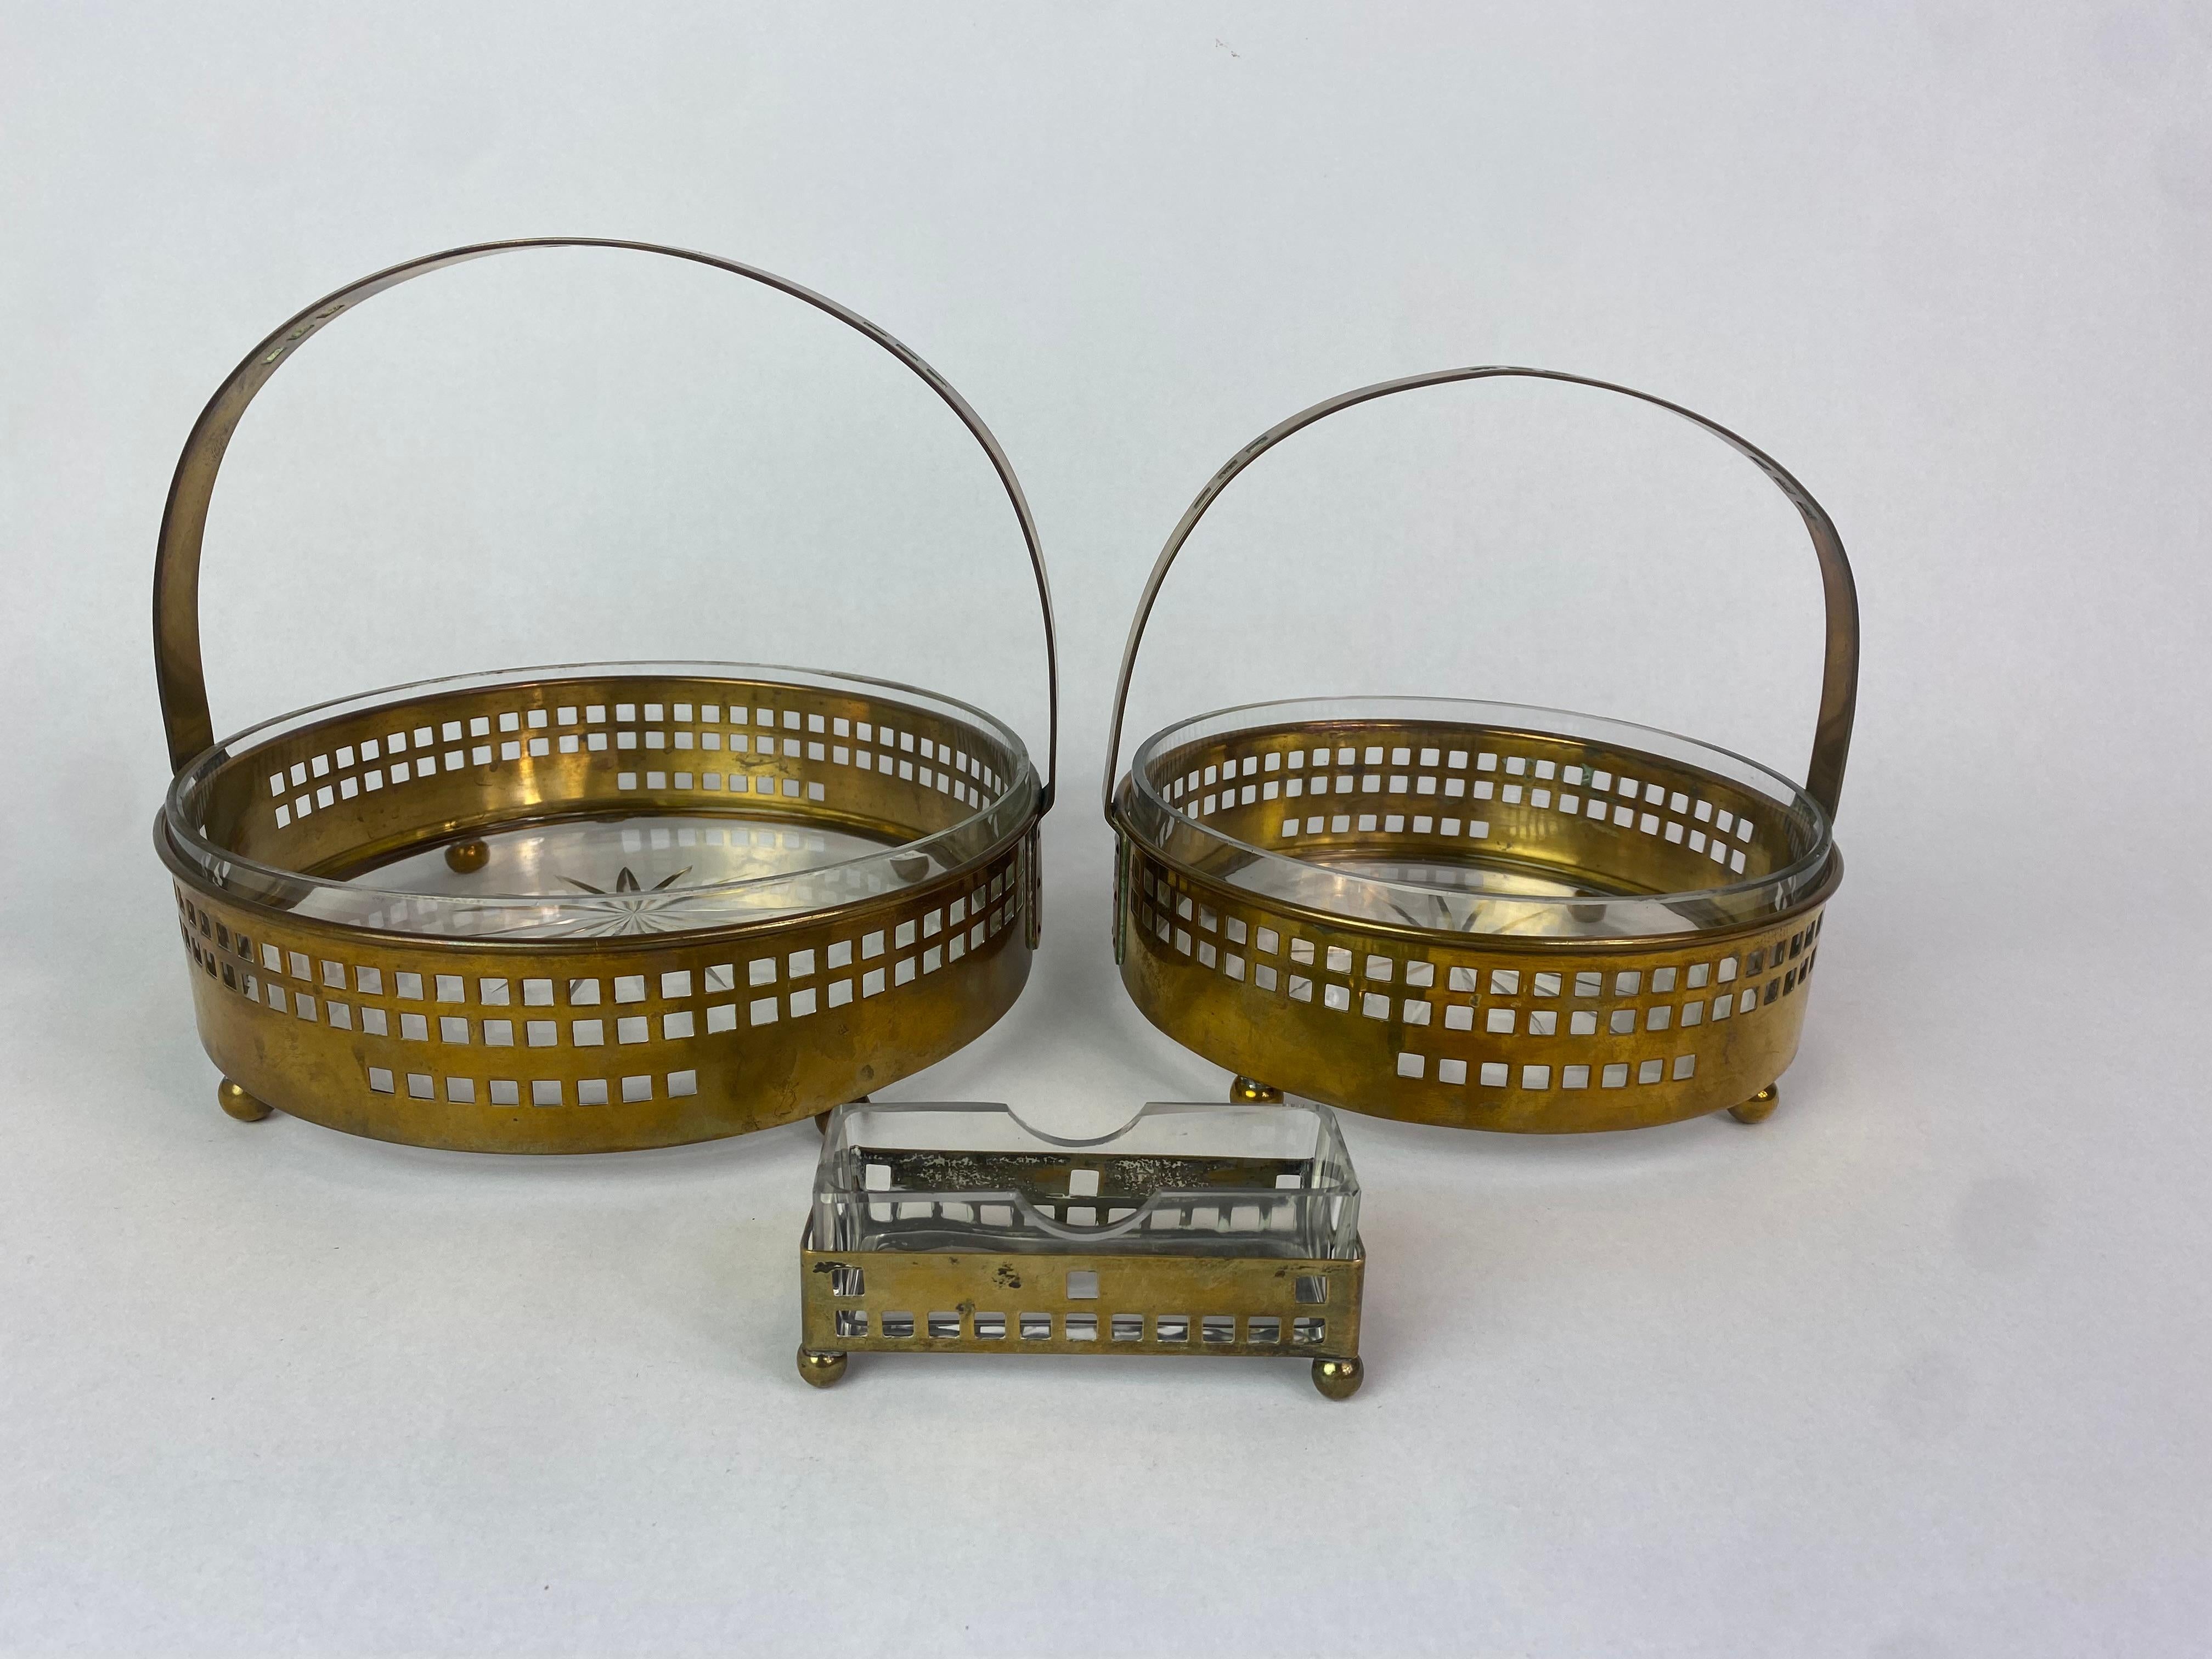 Brass secessionist baskets and toothpick holder by Hans Ofner/Josef Hoffmann with glass inserts in original vintage condition.